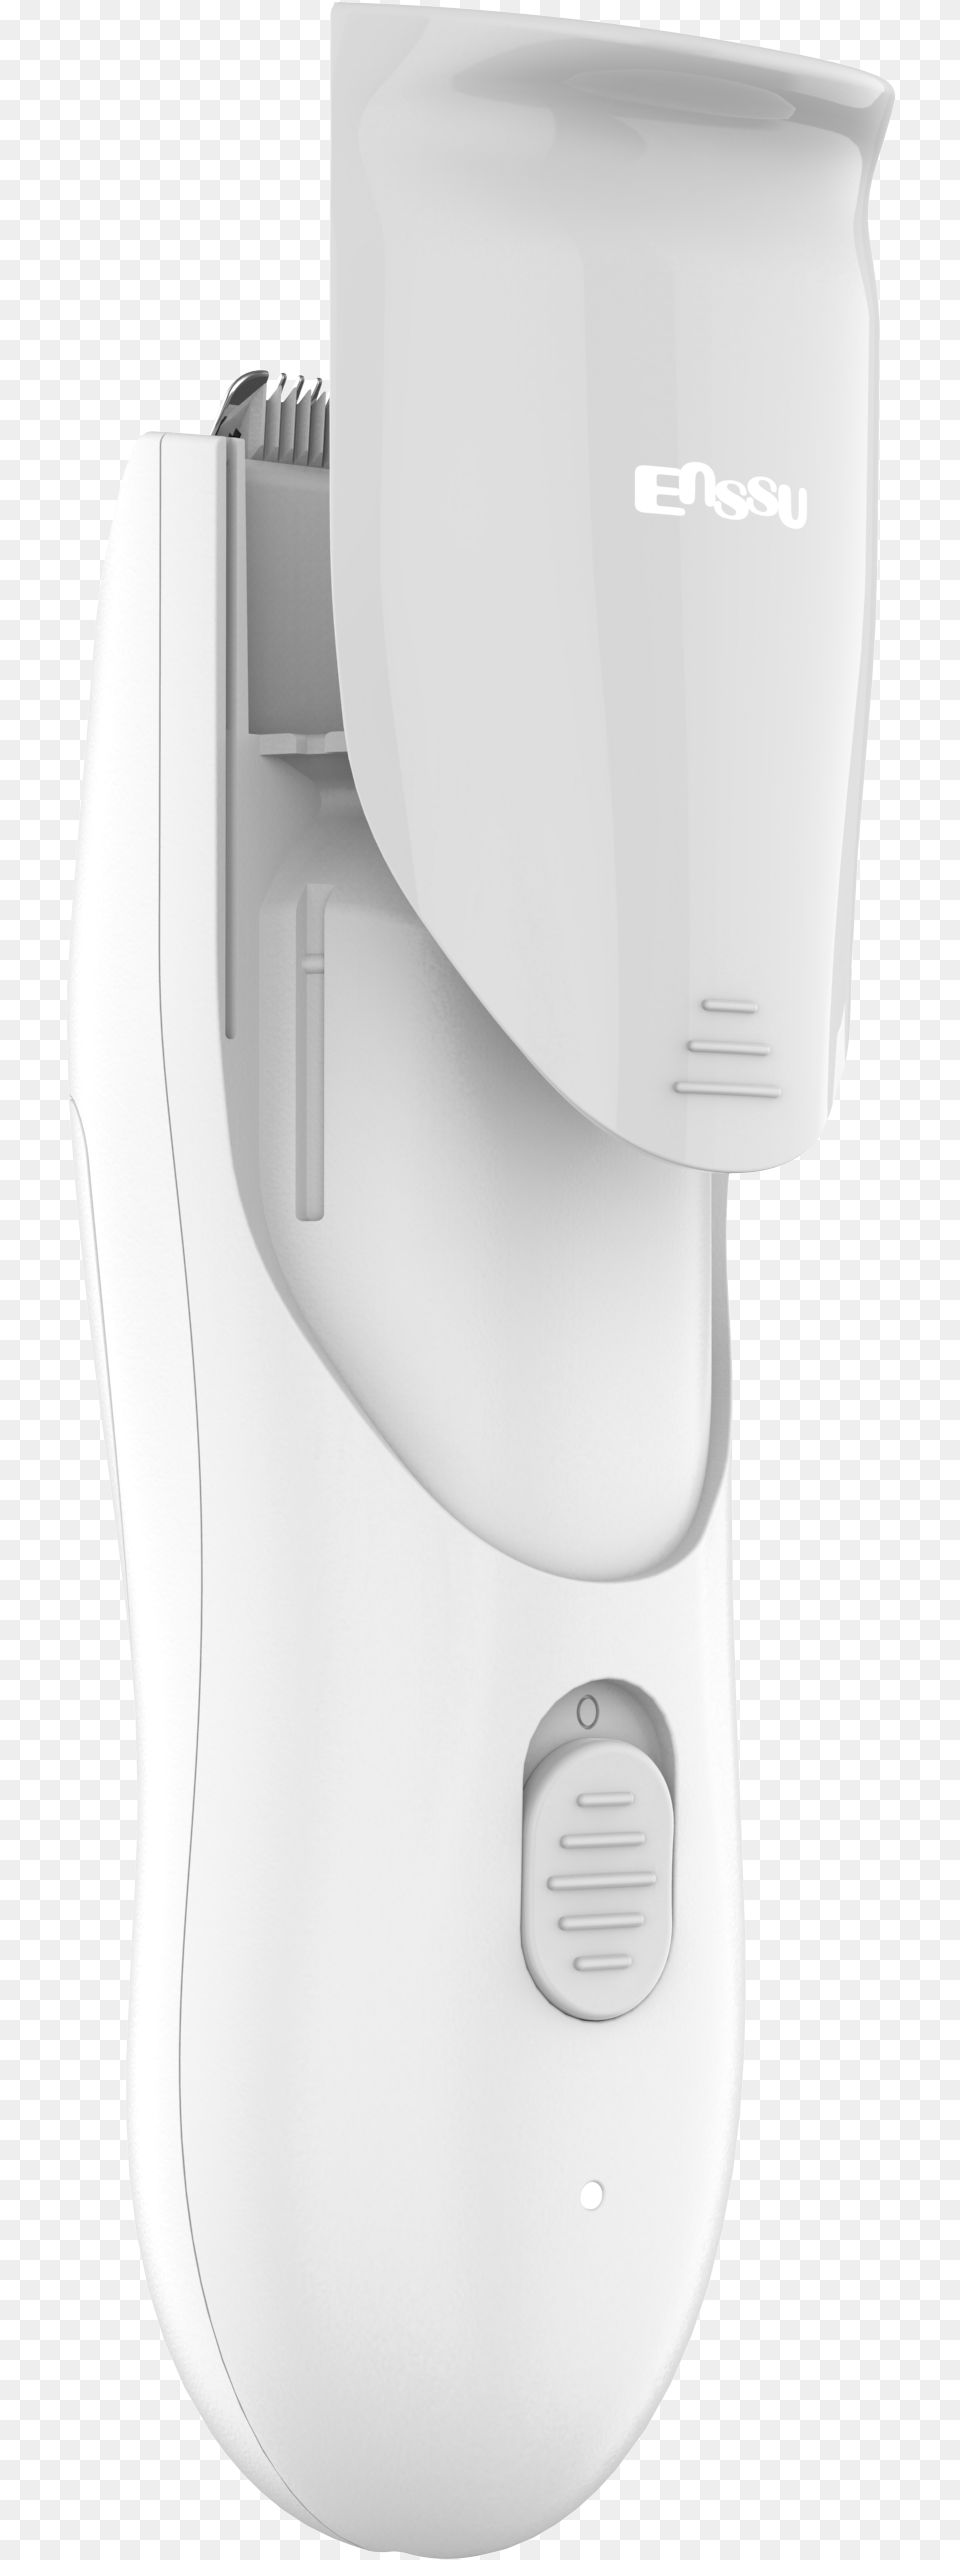 Enssu Vacuum Hair Trimmer Tool, Device, Appliance, Electrical Device, Mixer Free Transparent Png